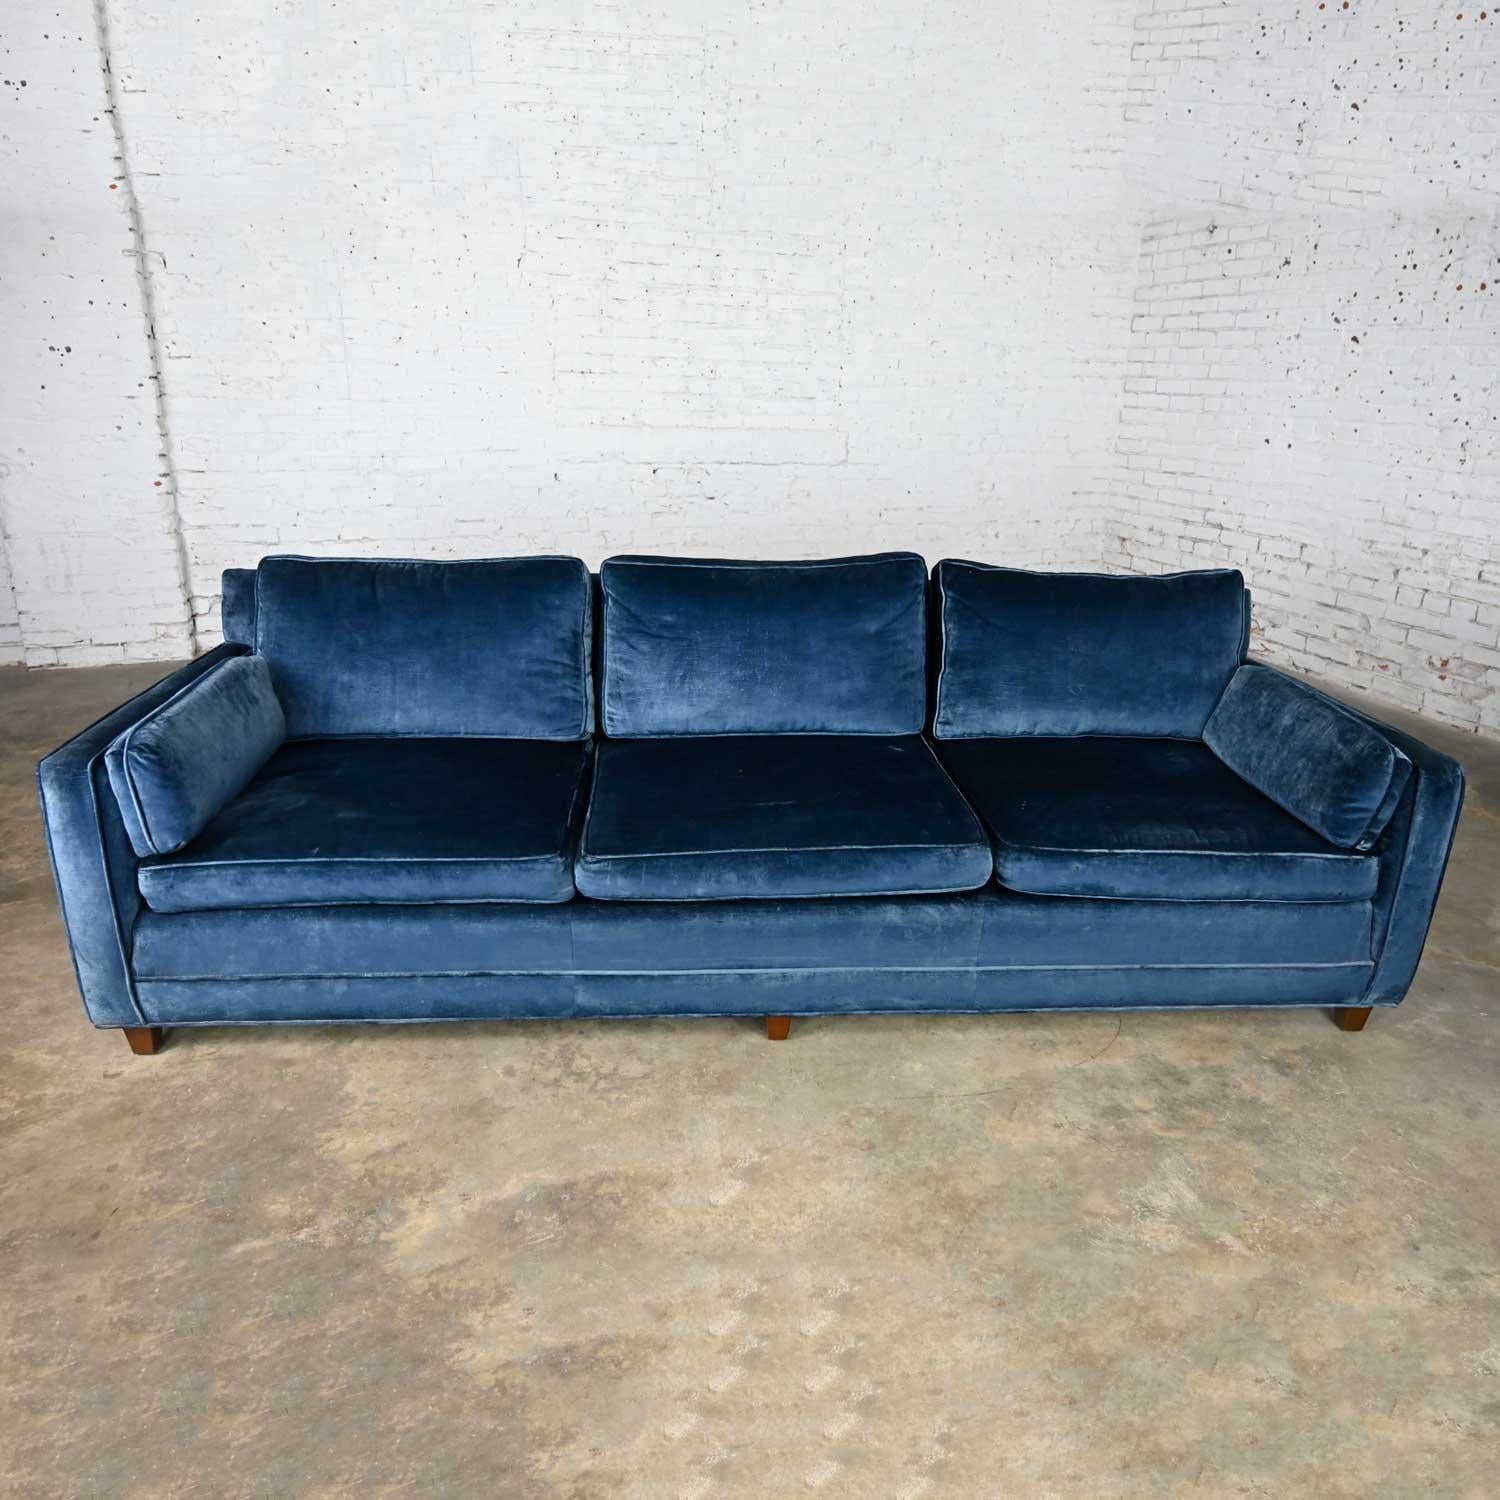 Vintage Baker Lawson Style Low Profile Sofa in Bellagio Cobalt Fabric by Fabricu 3